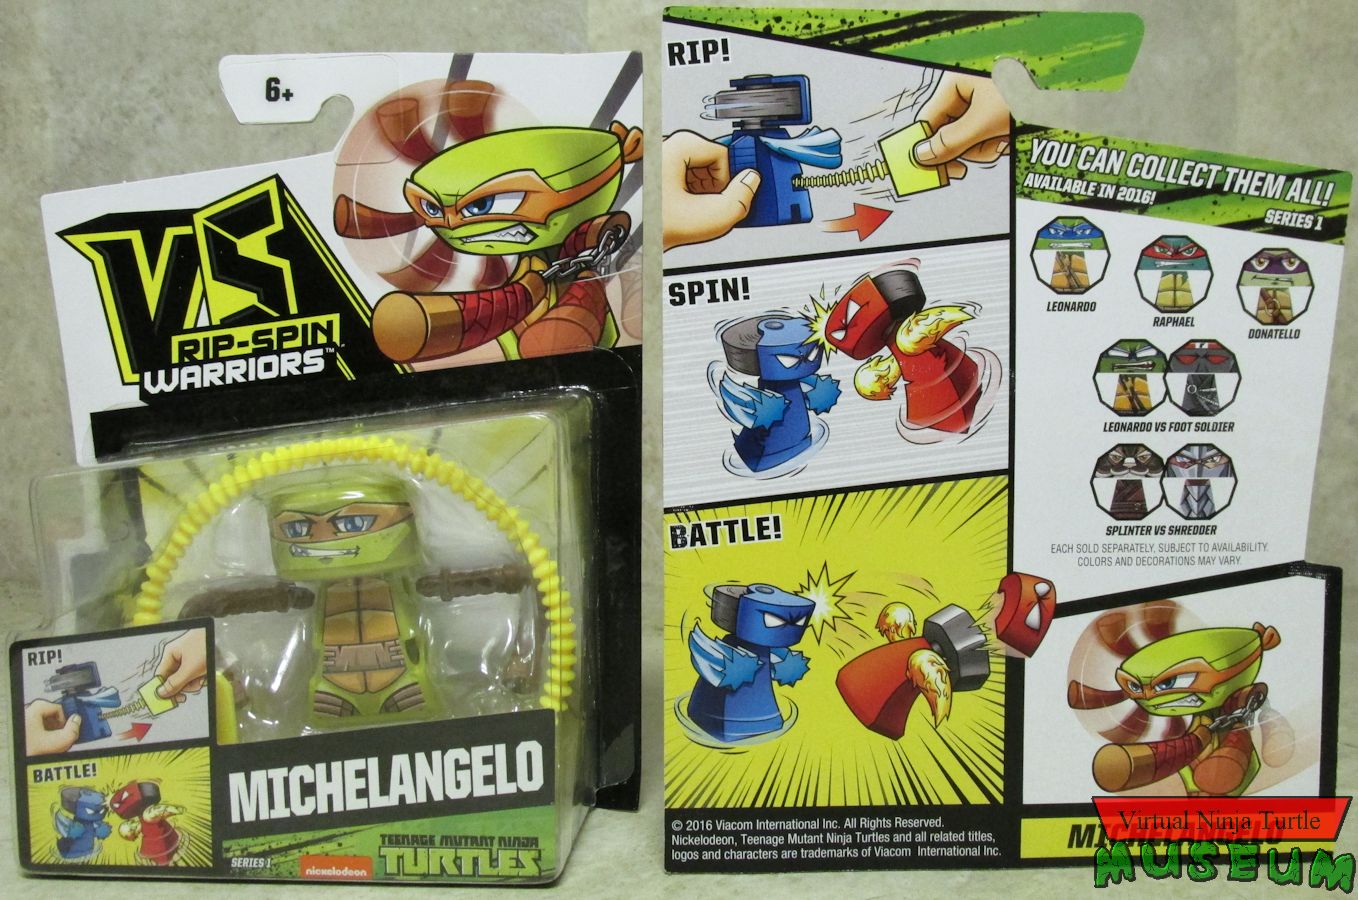 Michelangelo card front and back